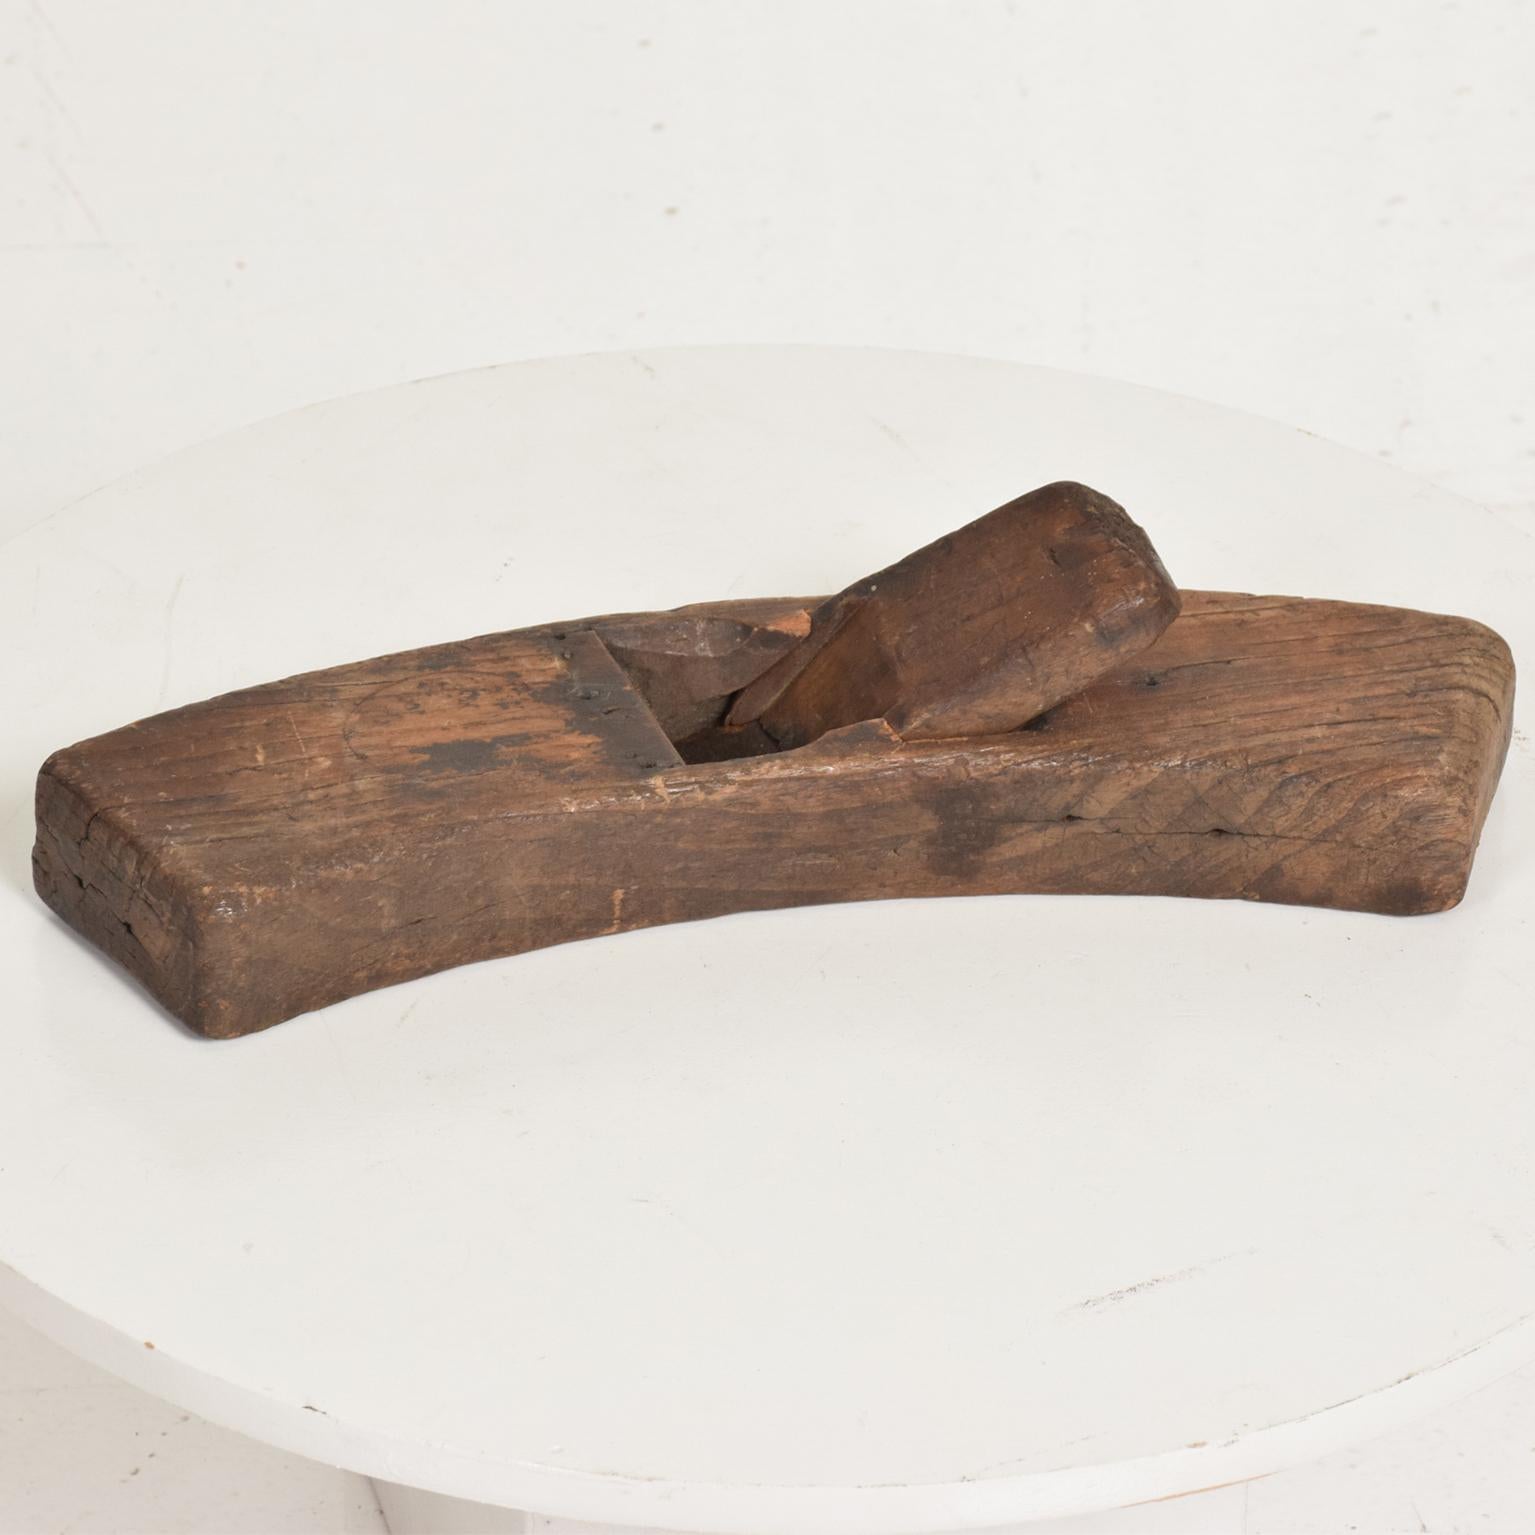 Antique Japanese hand wood planer curved carpentry plane tool.
Beautiful decorative collector's piece
Original vintage unrestored preowned vintage condition. 
Dimensions: 13.5 L x 3 W x 3 tall inches
Refer to images please.



   